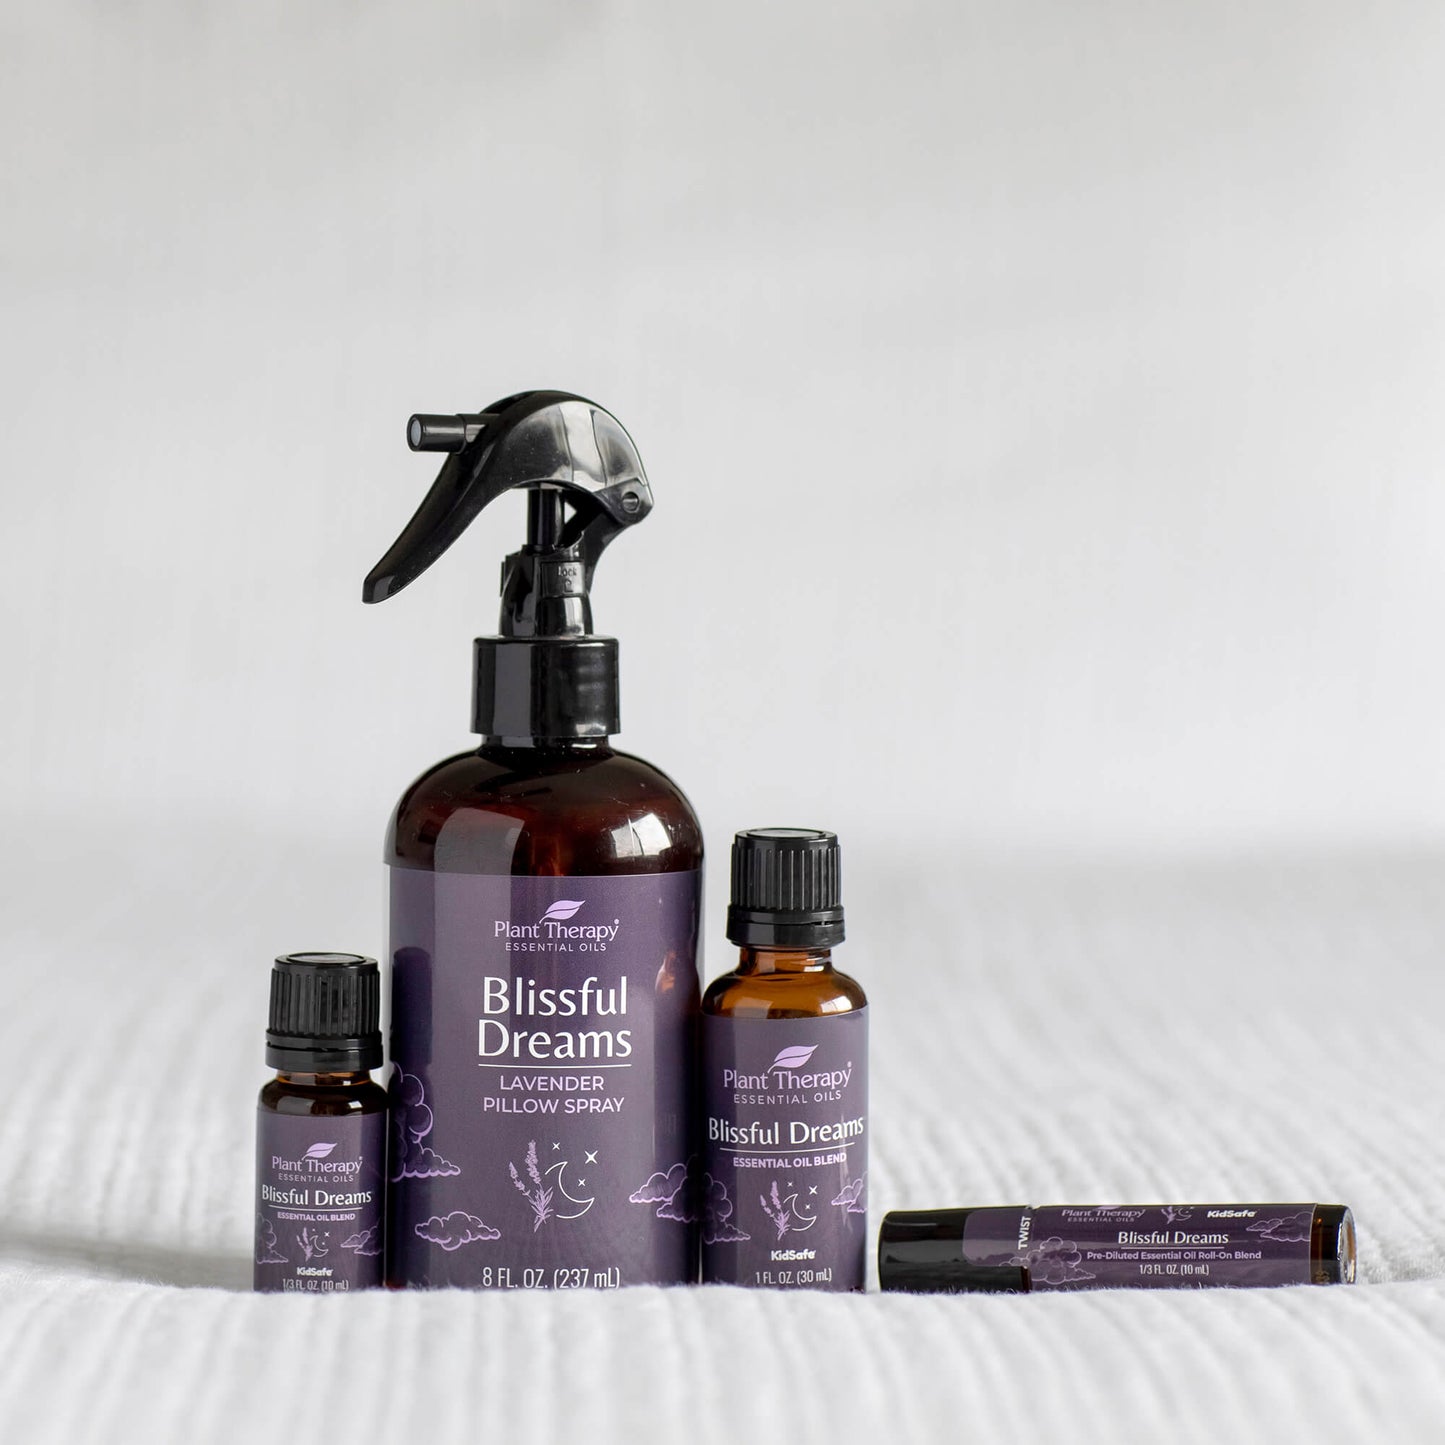 Blissful Dreams Lavender Pillow Spray all sizes shown